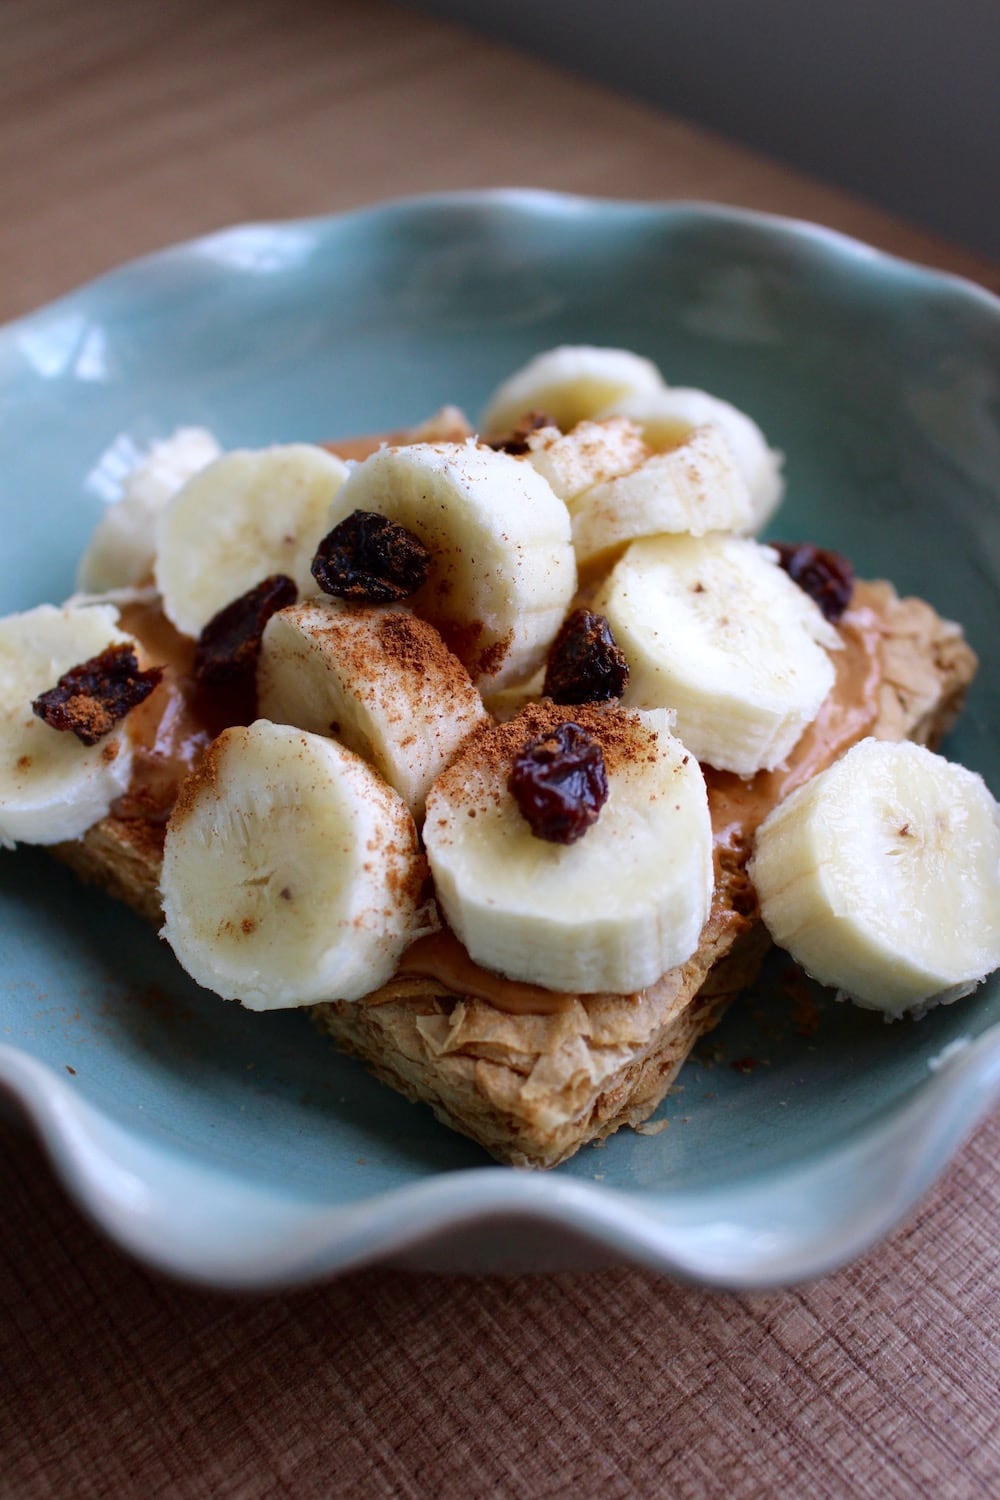 Weetabix with cashew butter, a sliced banana and some raisins